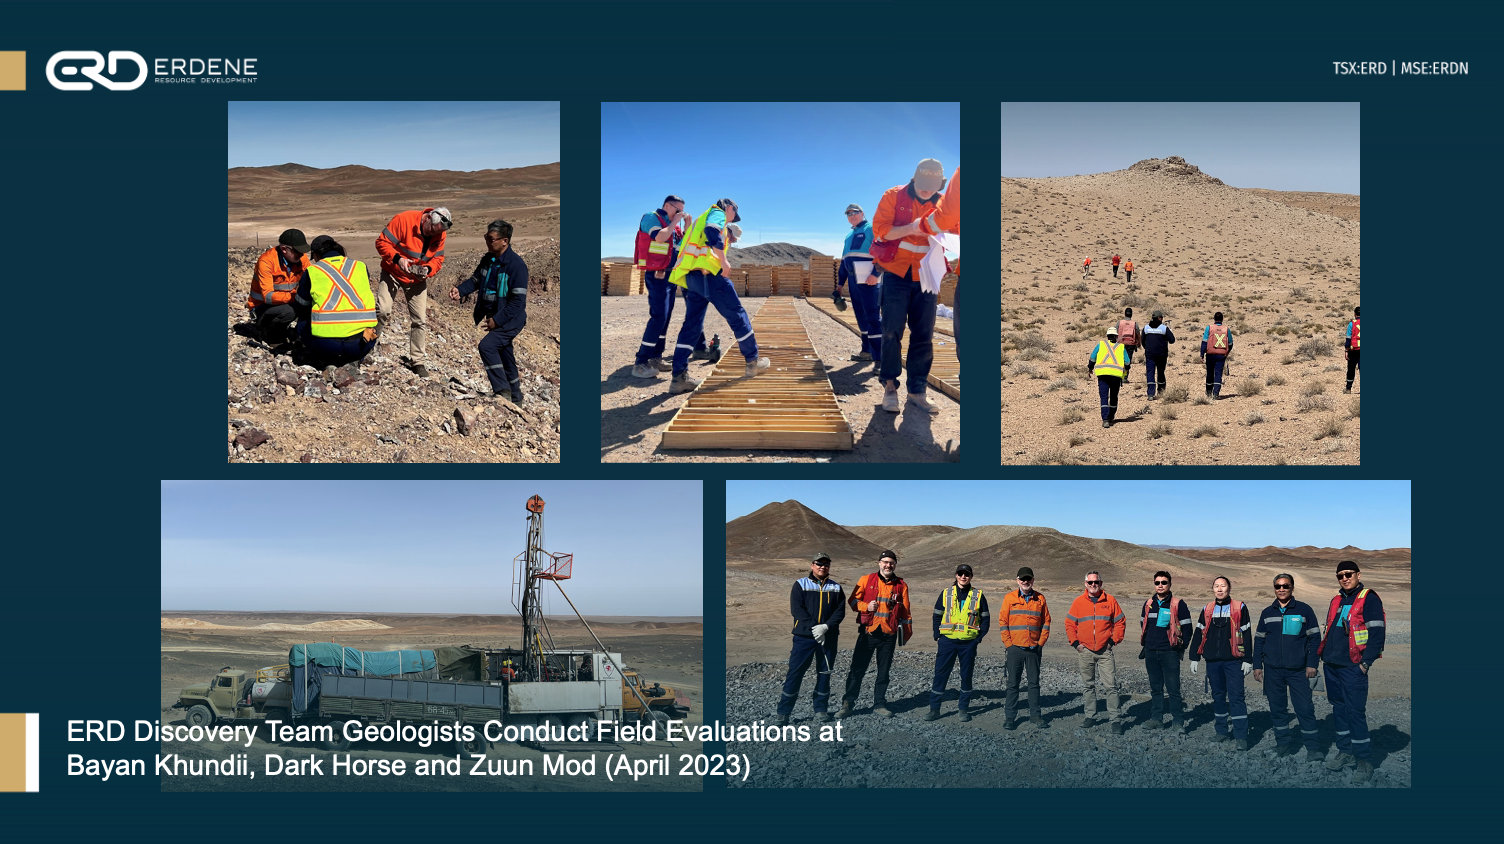 ERD Discovery Team Geologists Conduct Field Evaluations at Bayan Khundii, Dark Horse and Zuun Mod